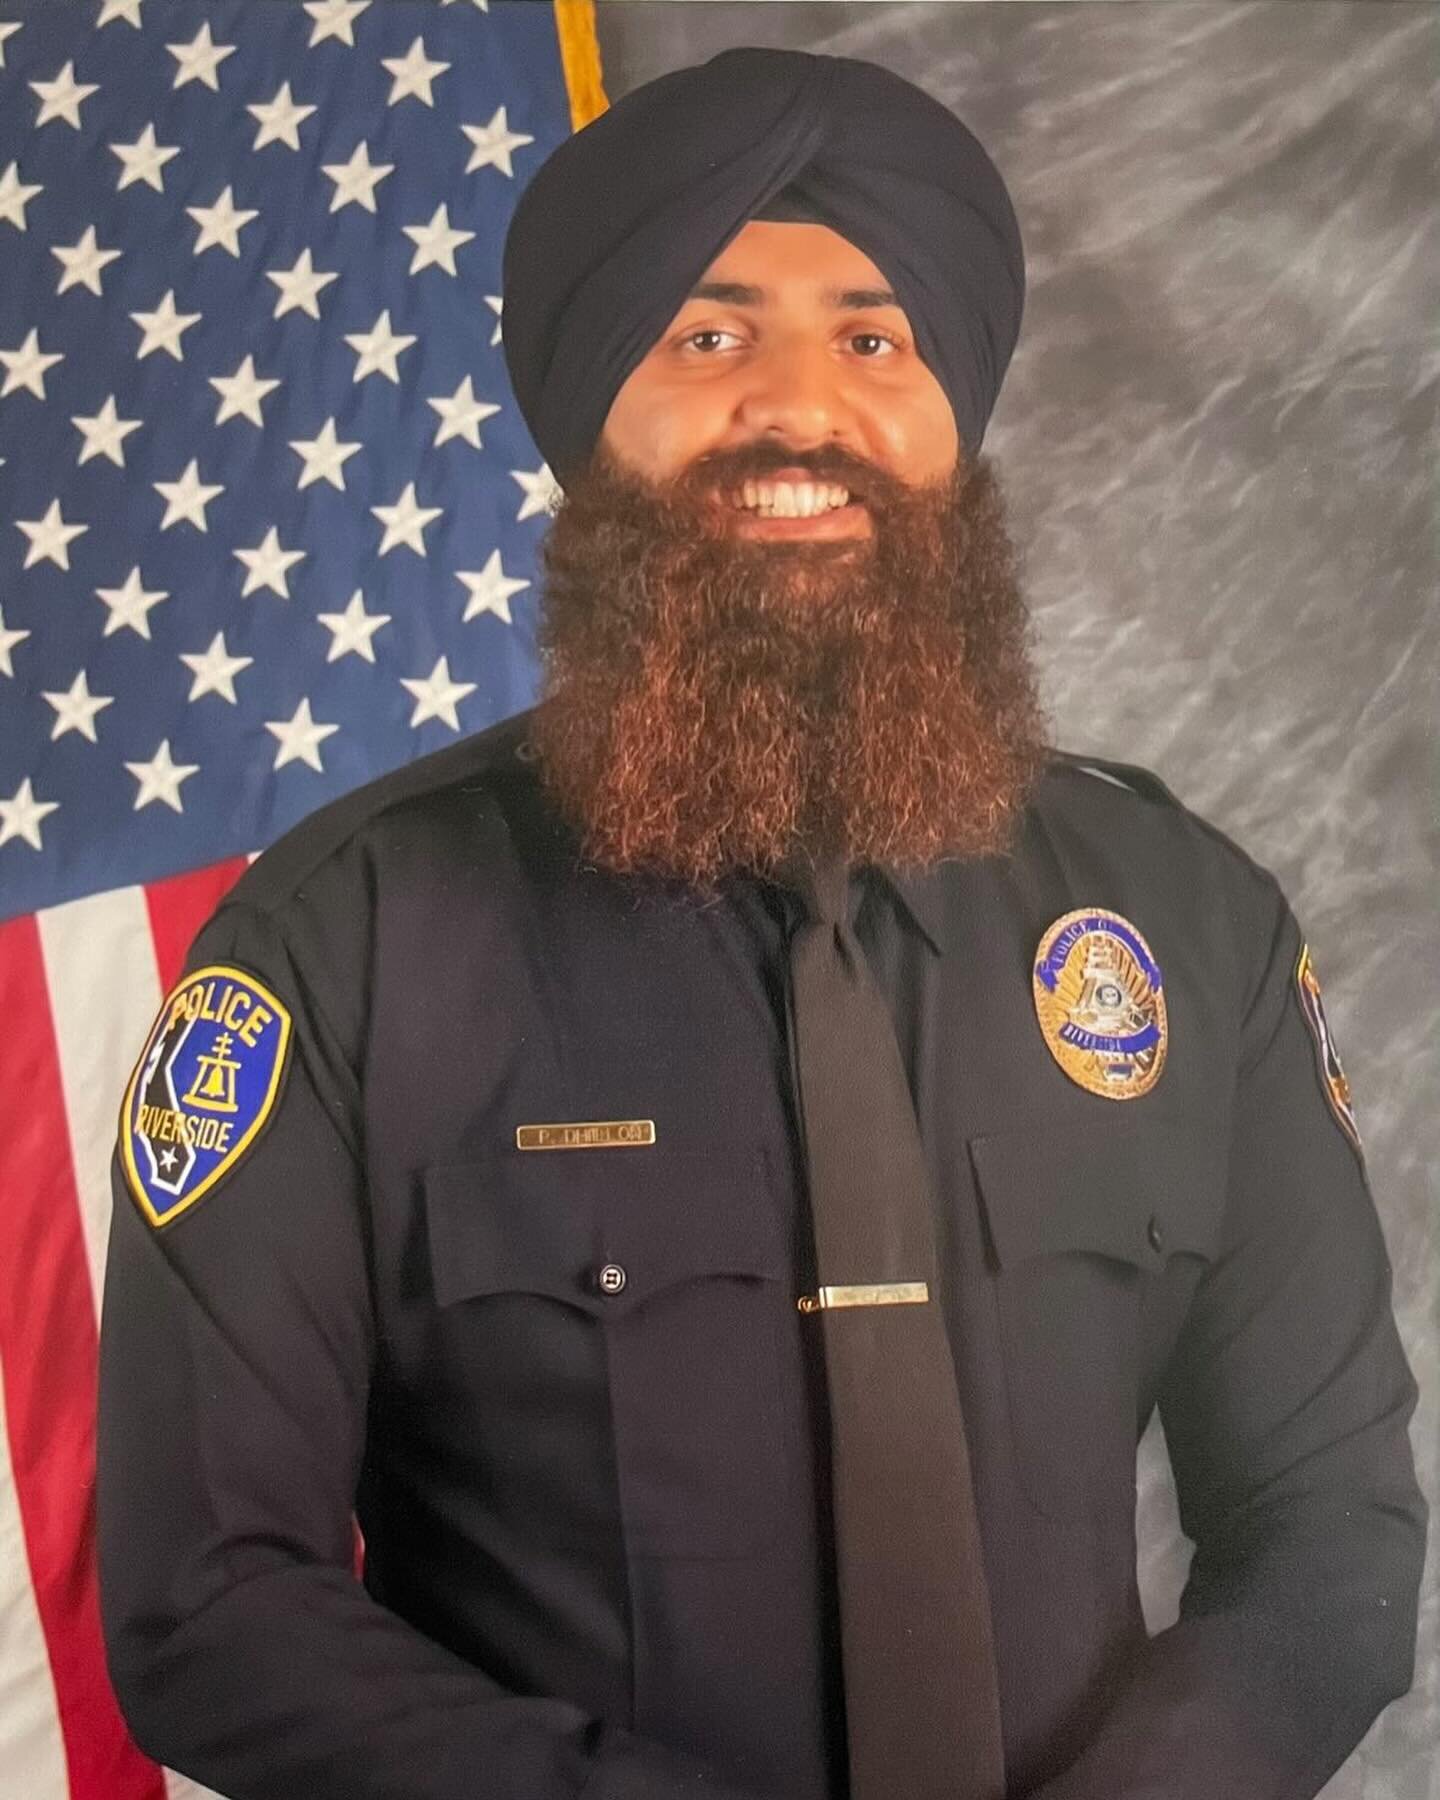 We would like to congratulate Police Officer Parjeet Dhillon on joining the ranks of law enforcement and also keeping his faith intact. Police Officer Dhillon states &ldquo;Ever since I was young I always knew I wanted to choose a profession that ser